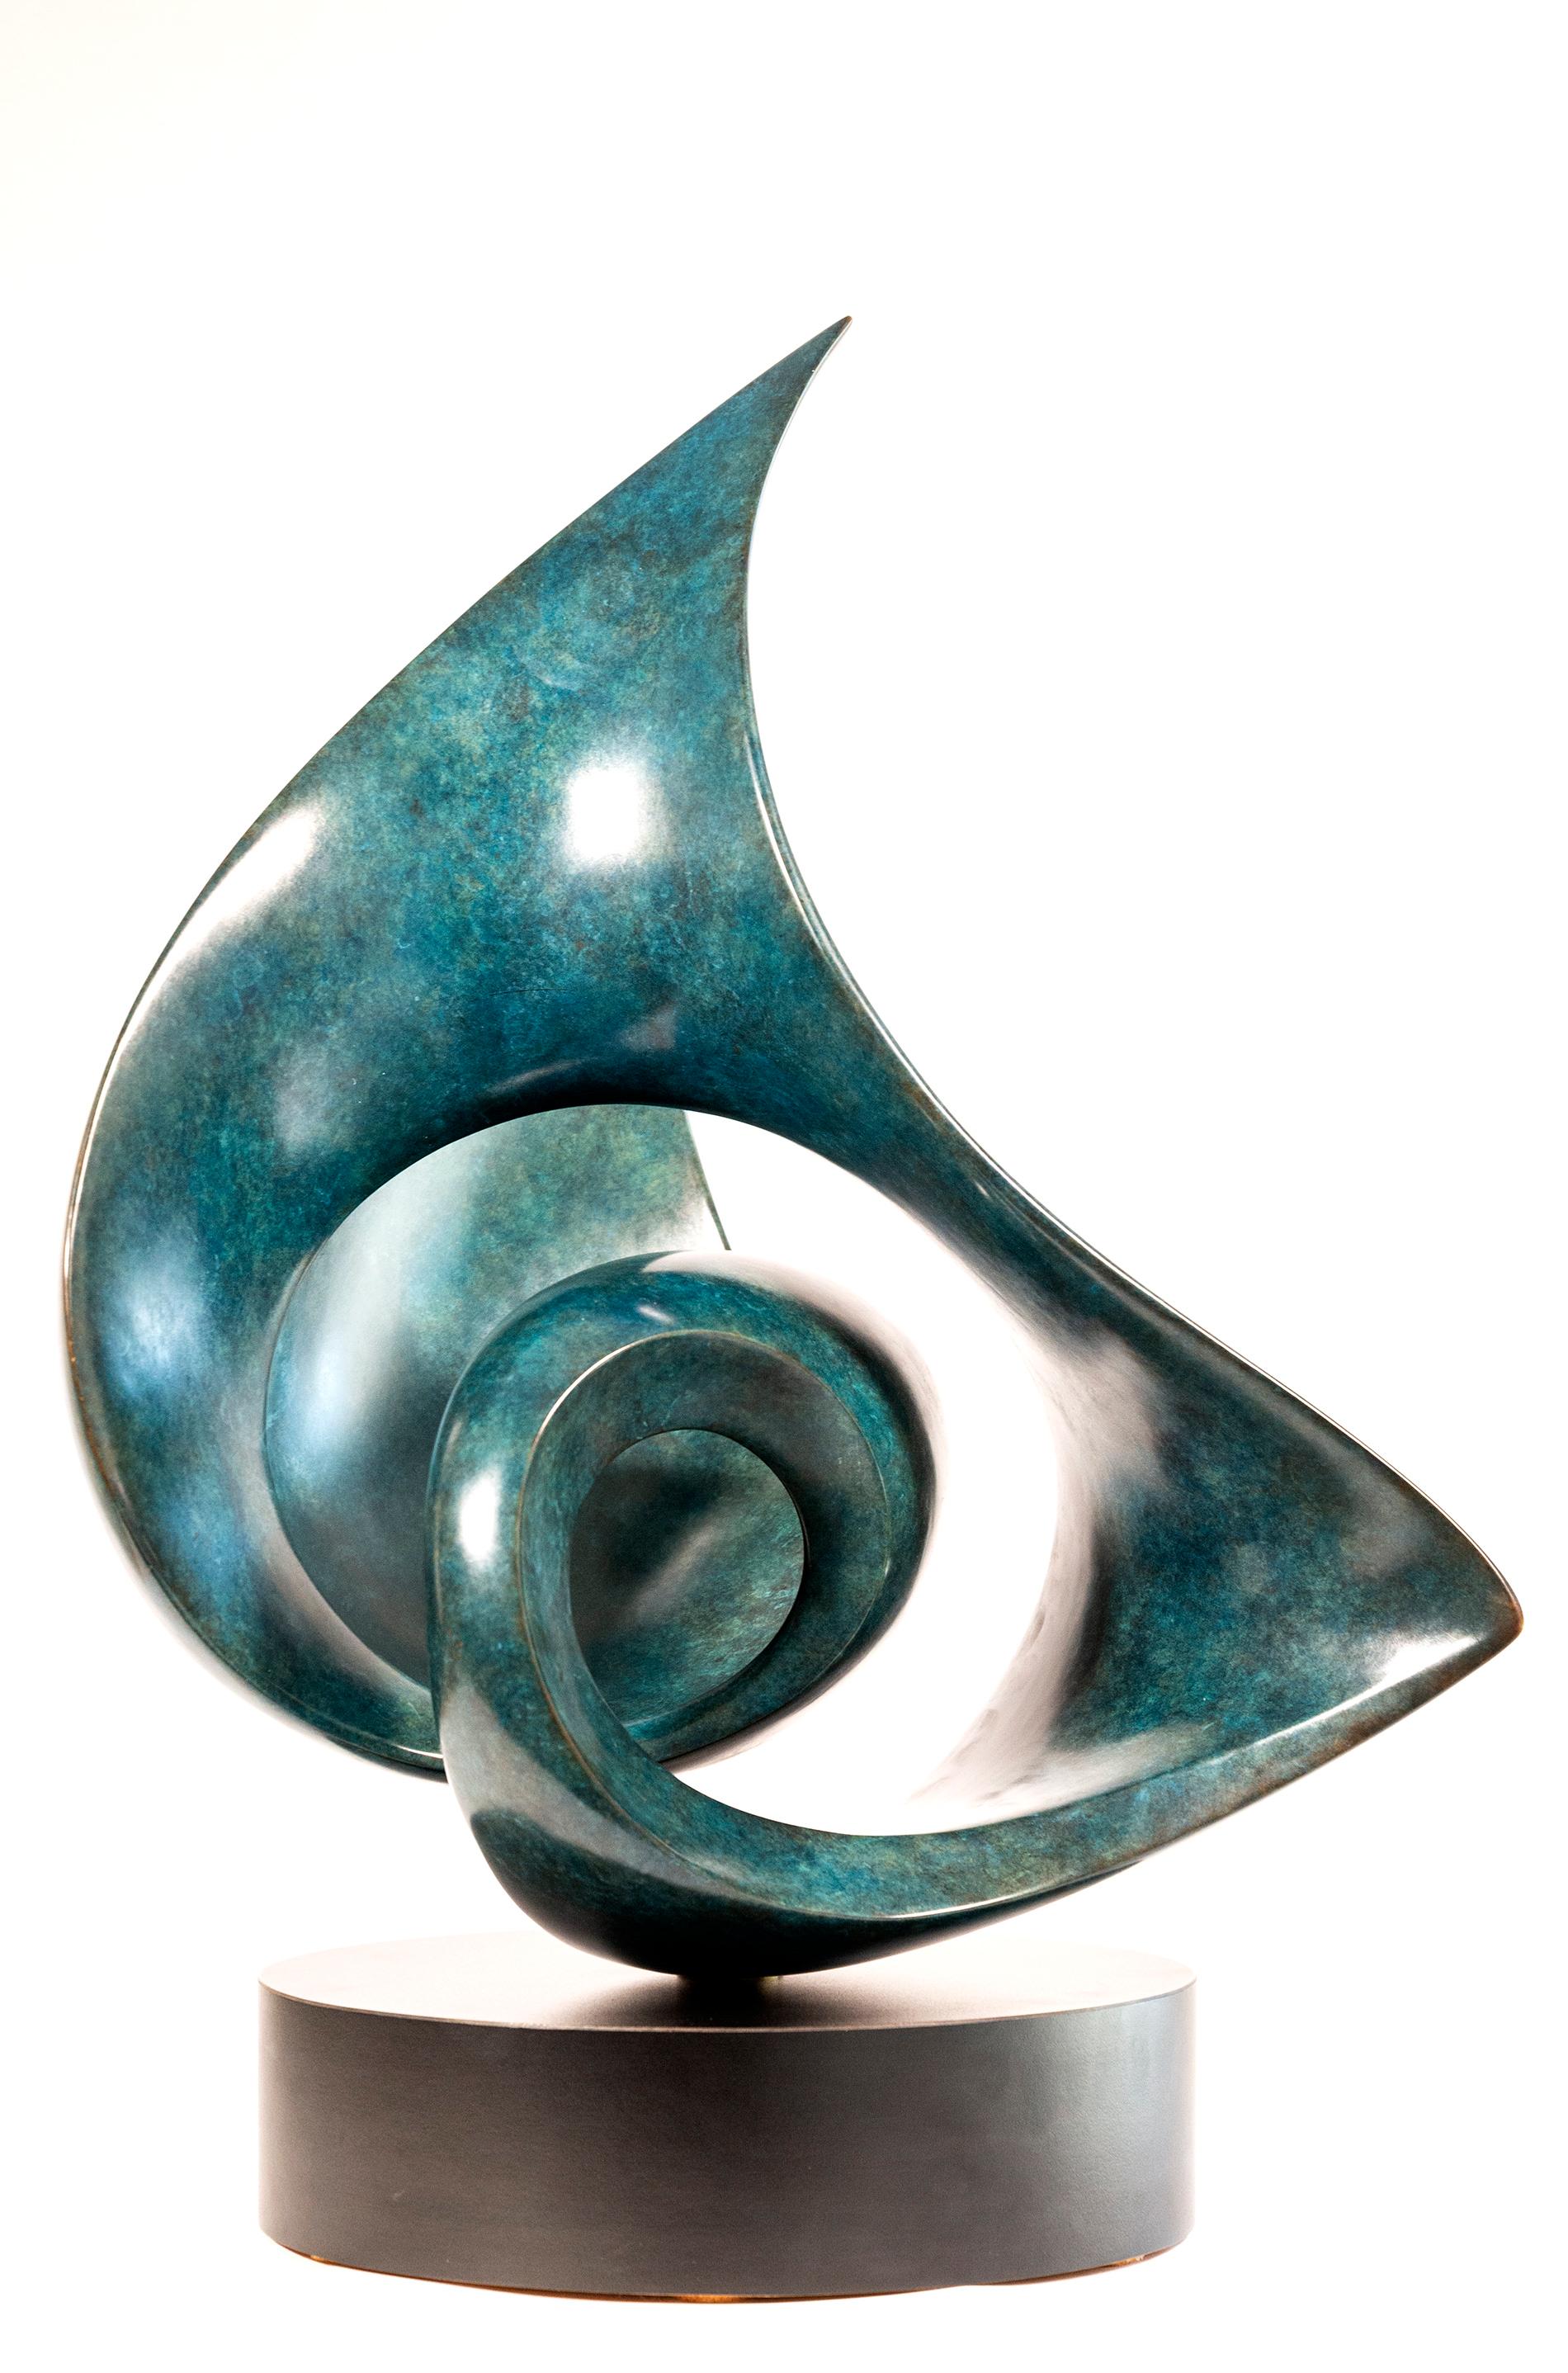 Eroica A.P. 1 - smooth, polished, abstract, contemporary, bronze sculpture - Sculpture by David Chamberlain